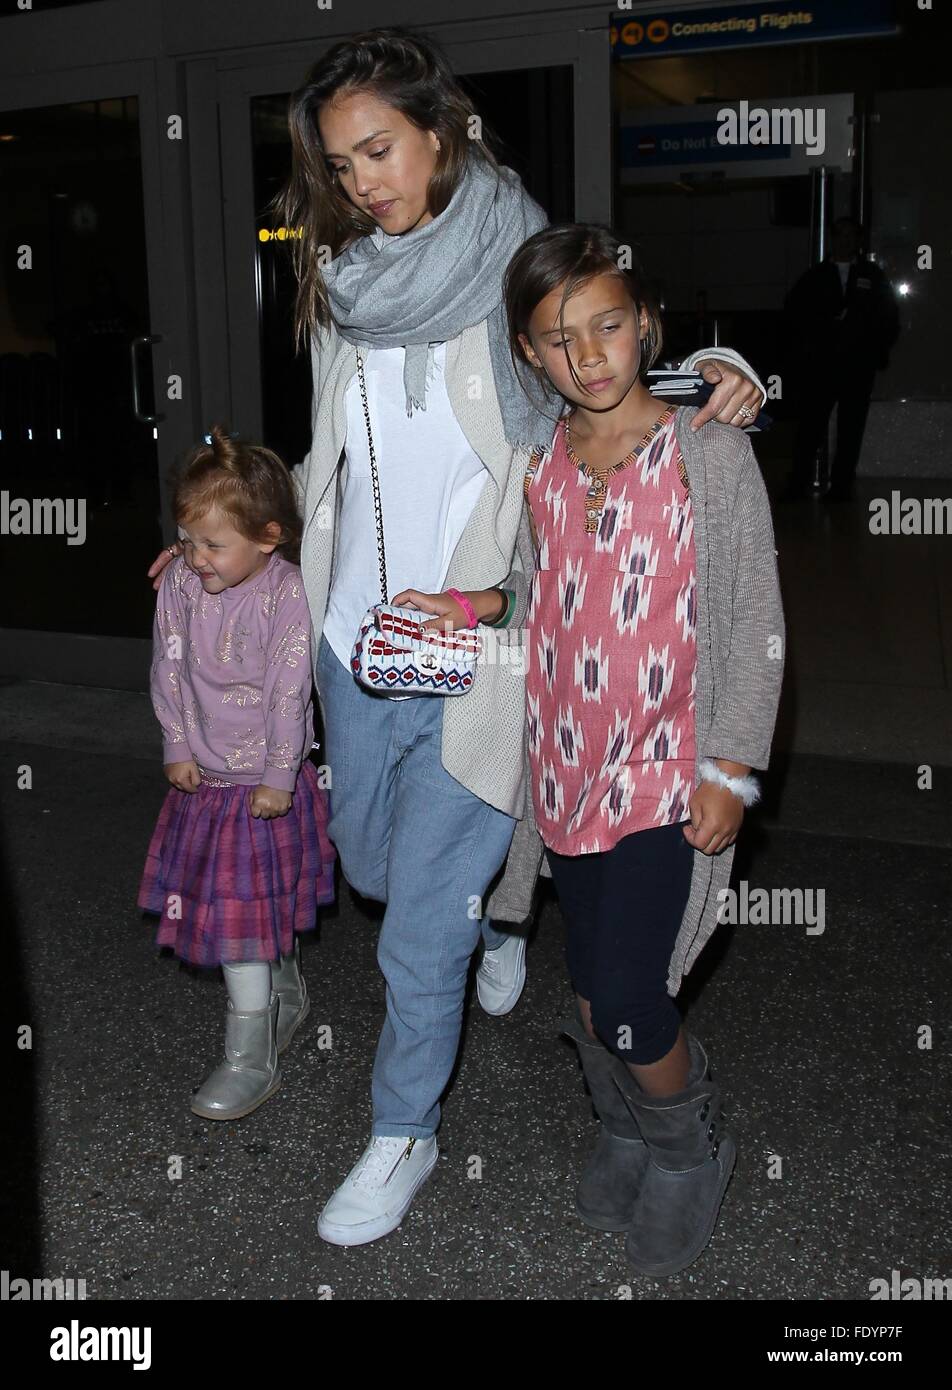 Jessica Alba and Cash Warren arrive at Los Angeles International (LAX) Airport with their two daughters. Cash arrived at the airport with the assistance of crutches.  Featuring: Jessica Alba, Honor Marie Warren, Haven Garner Warren Where: Los Angeles, Cal Stock Photo